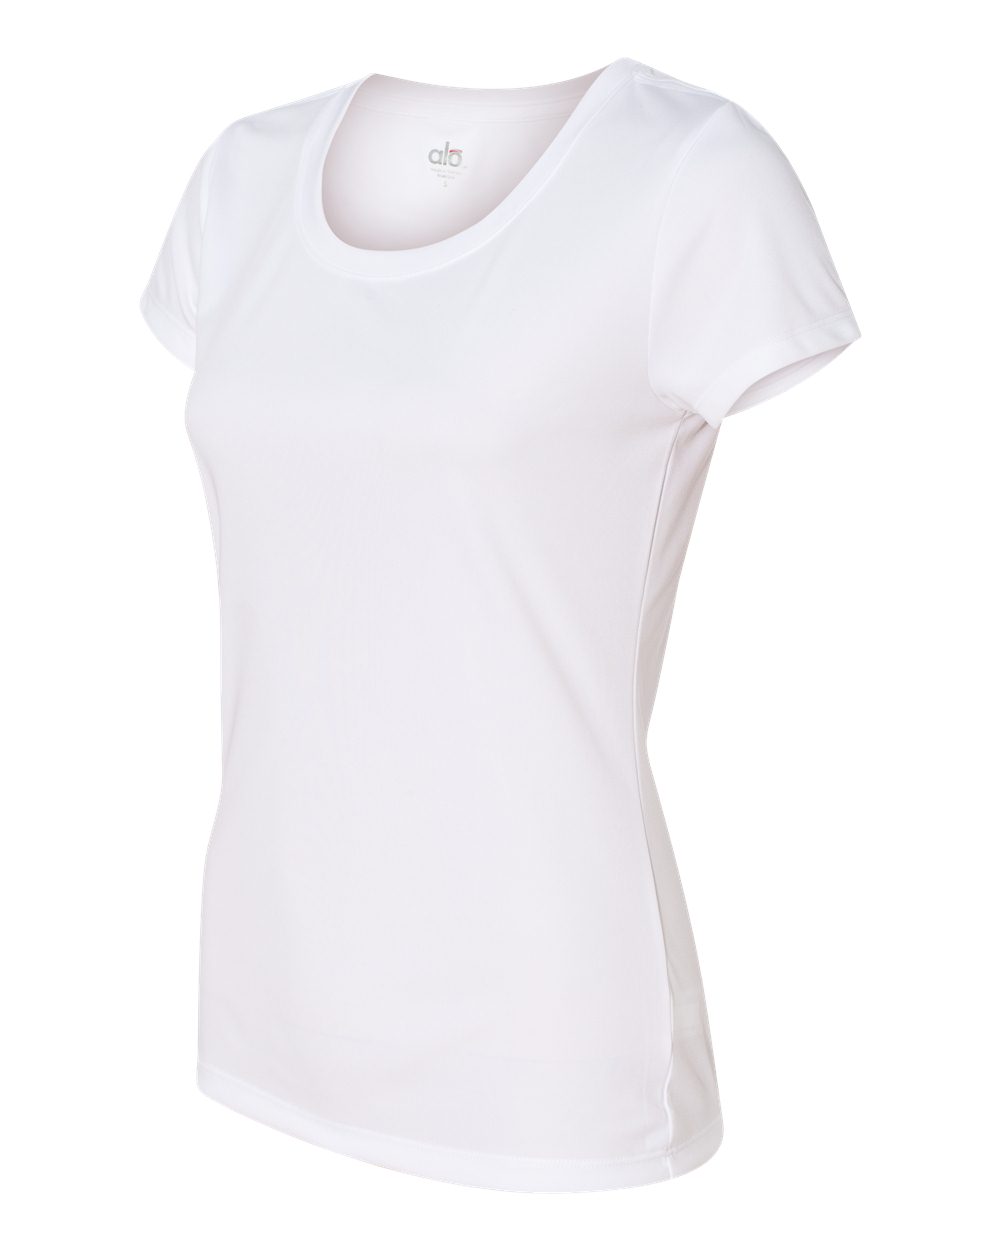 alo - Ladies' Polyester T-Shirt $6.90